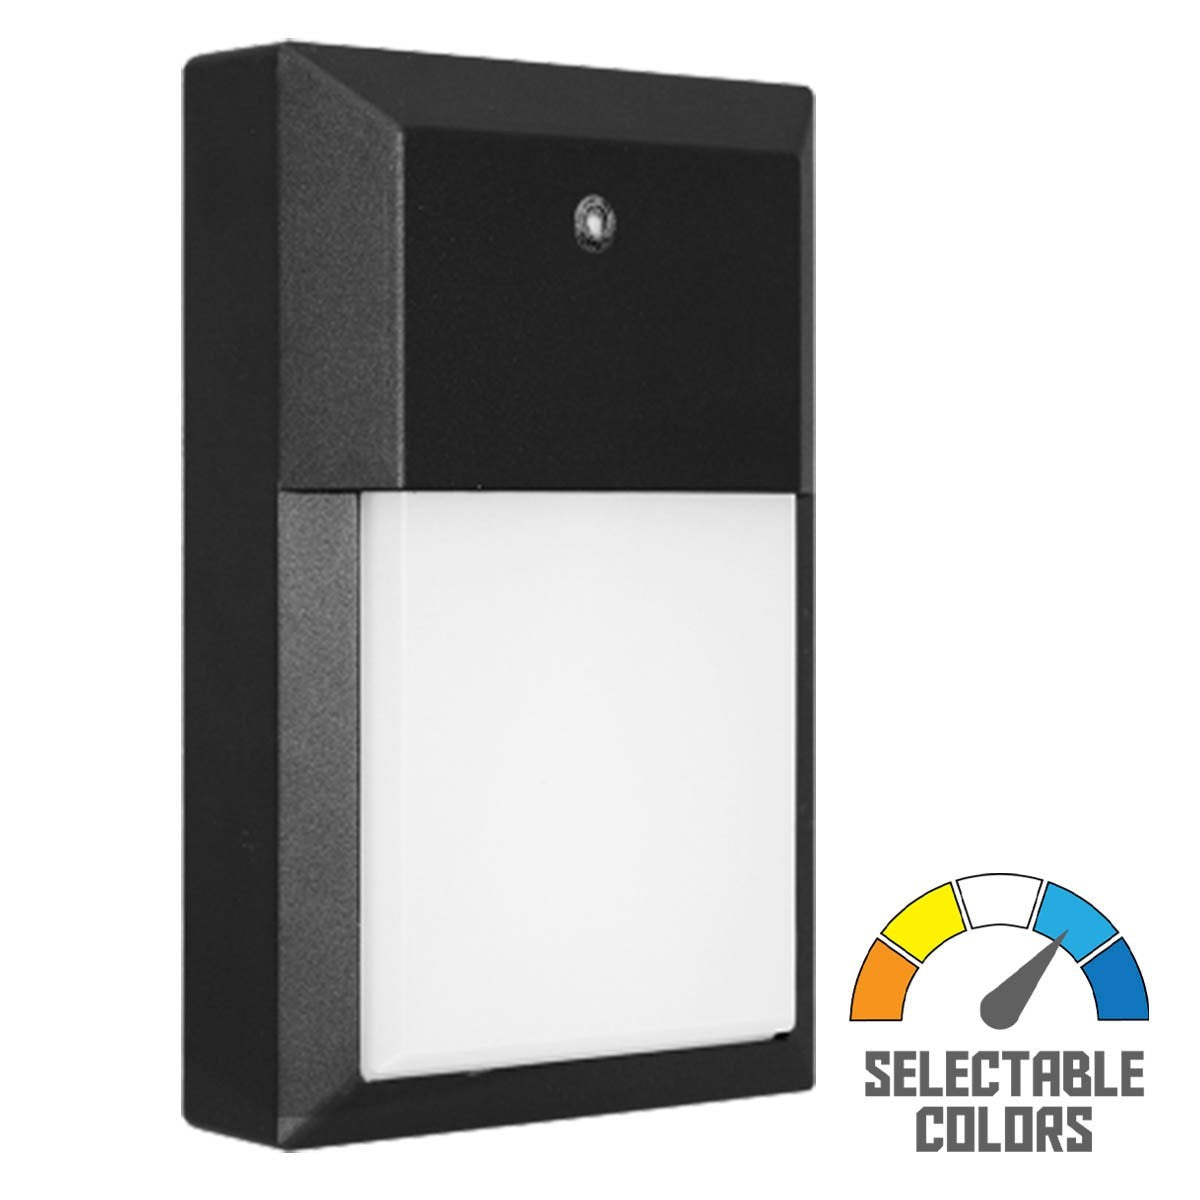 LED Mini Wall Pack With Photocell 16 Watts 1,600 Lumens 5 CCT Selectable 120V